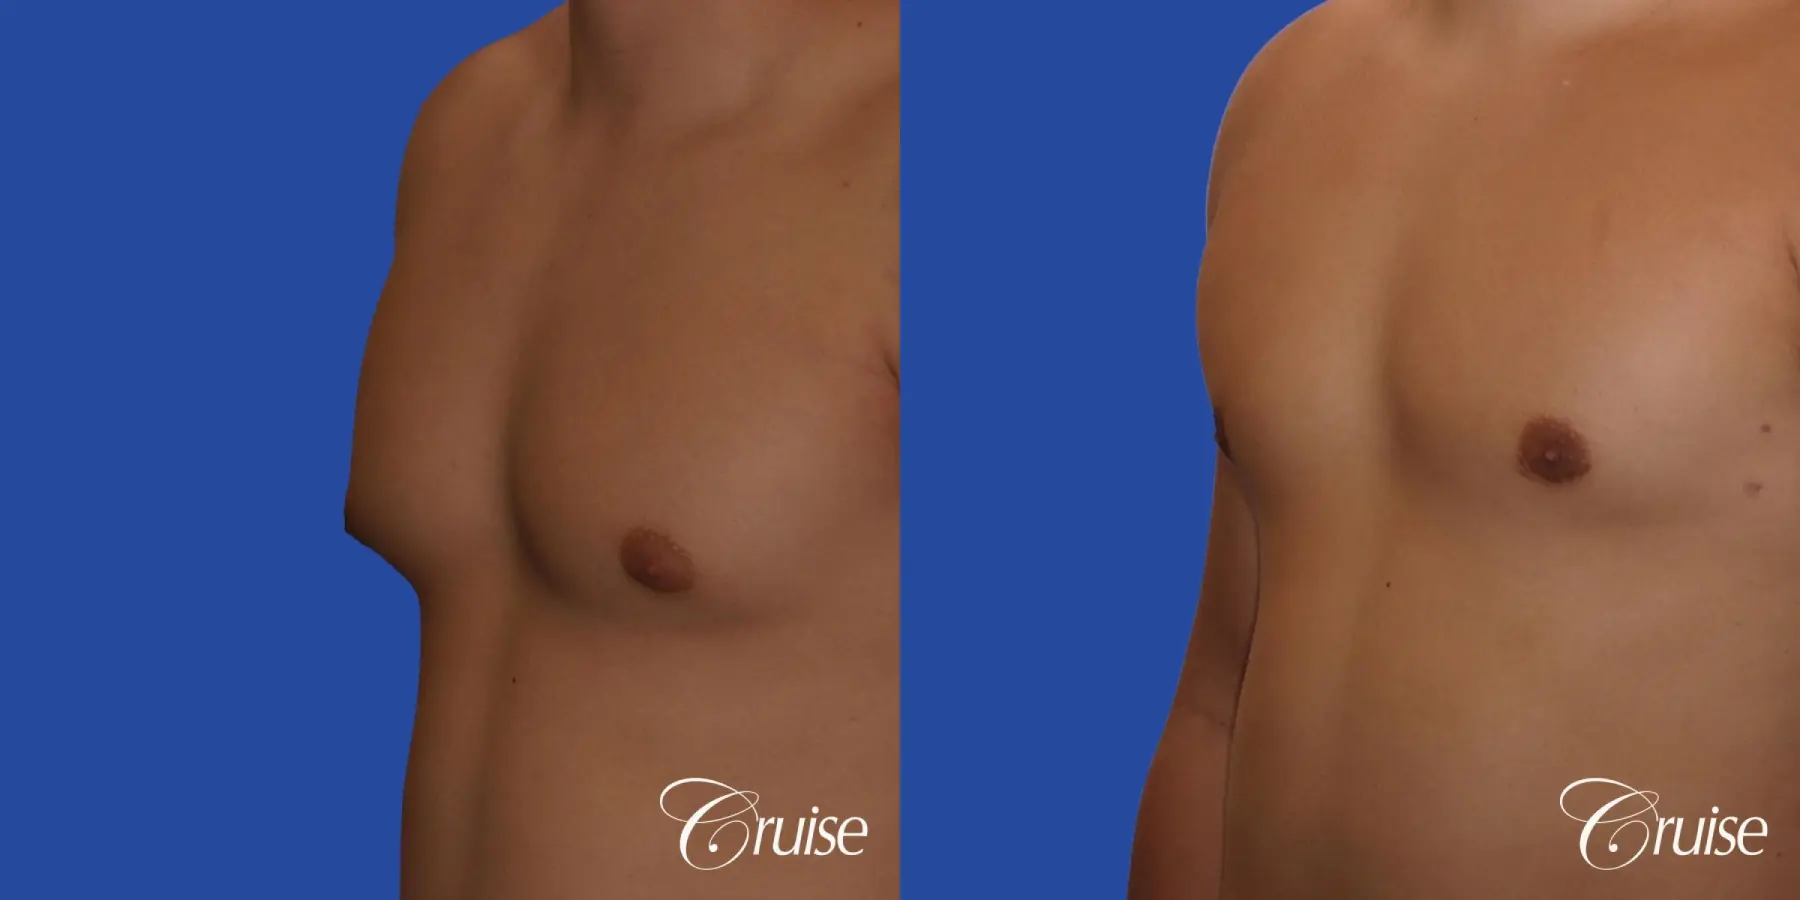 mild gynecomastia with puffy nipple and areola incision - Before and After 2